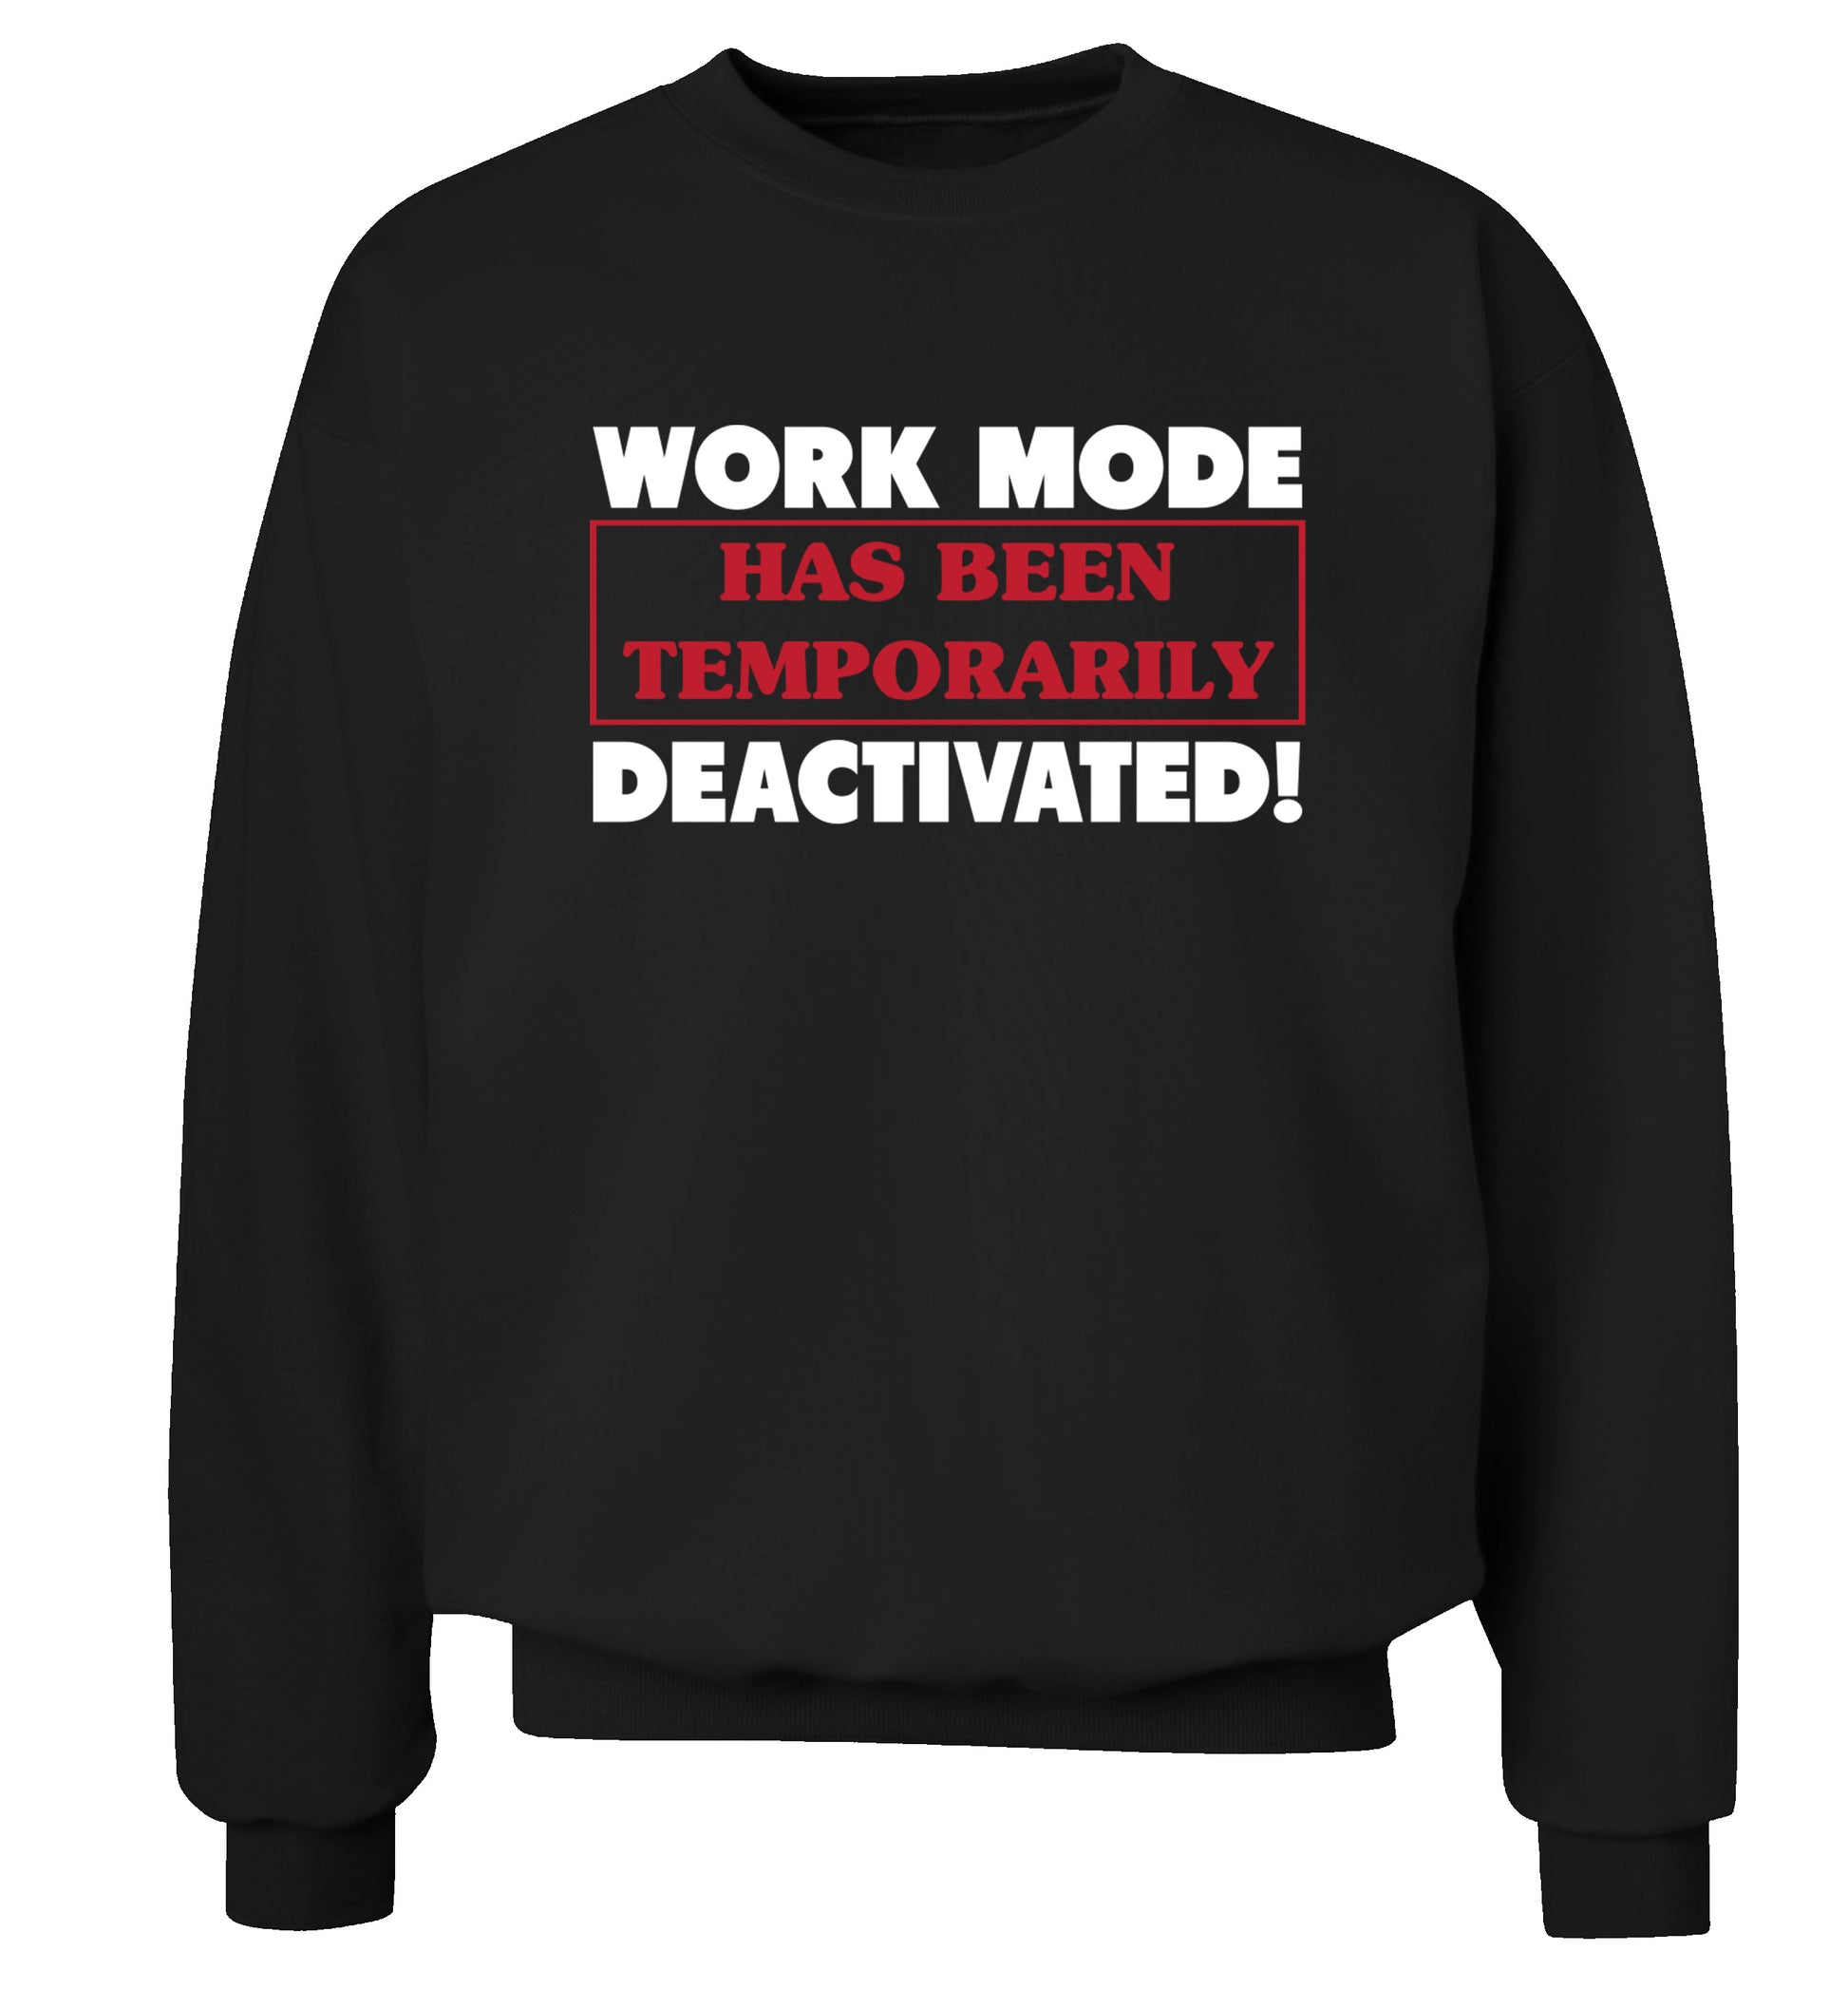 Work mode has now been temporarily deactivated Adult's unisex black Sweater 2XL